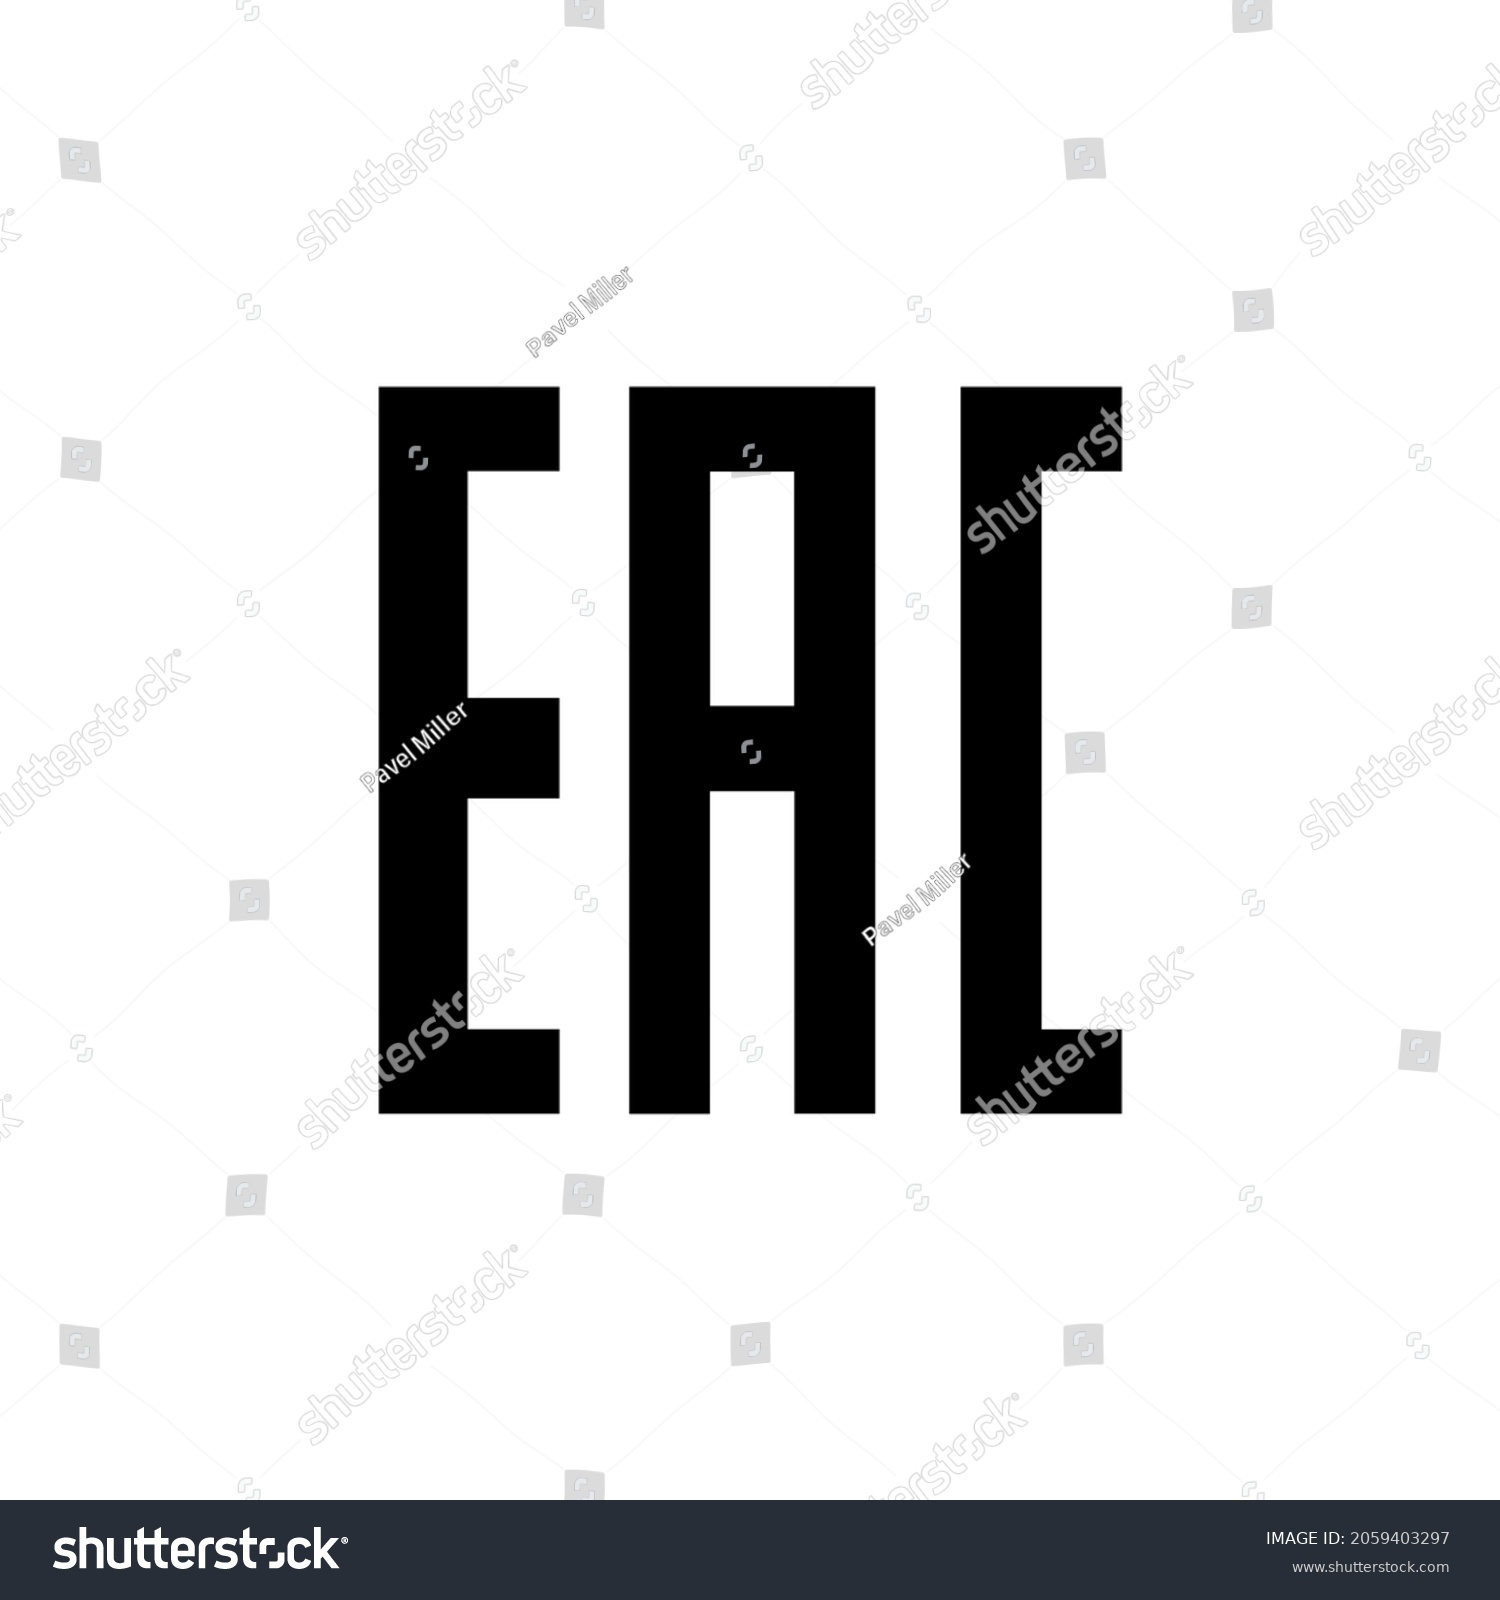 EAC знак. Символ EAC gif. Маркировка ЕАС вектор. Знак ЕАС Россия. Disconnected eac client